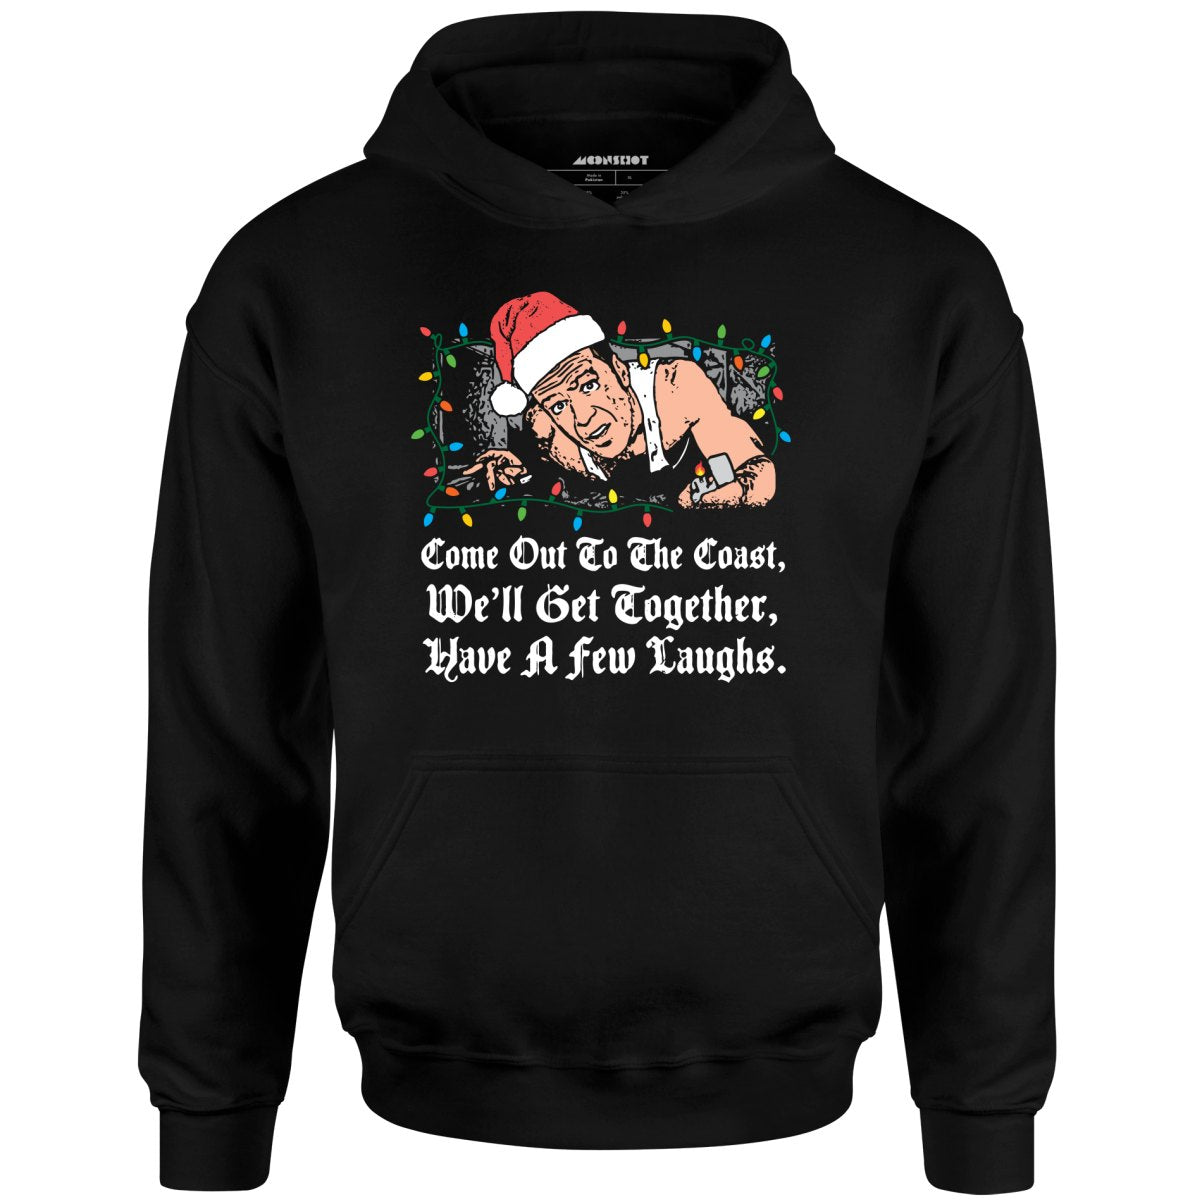 Come Out to The Coast - Unisex Hoodie